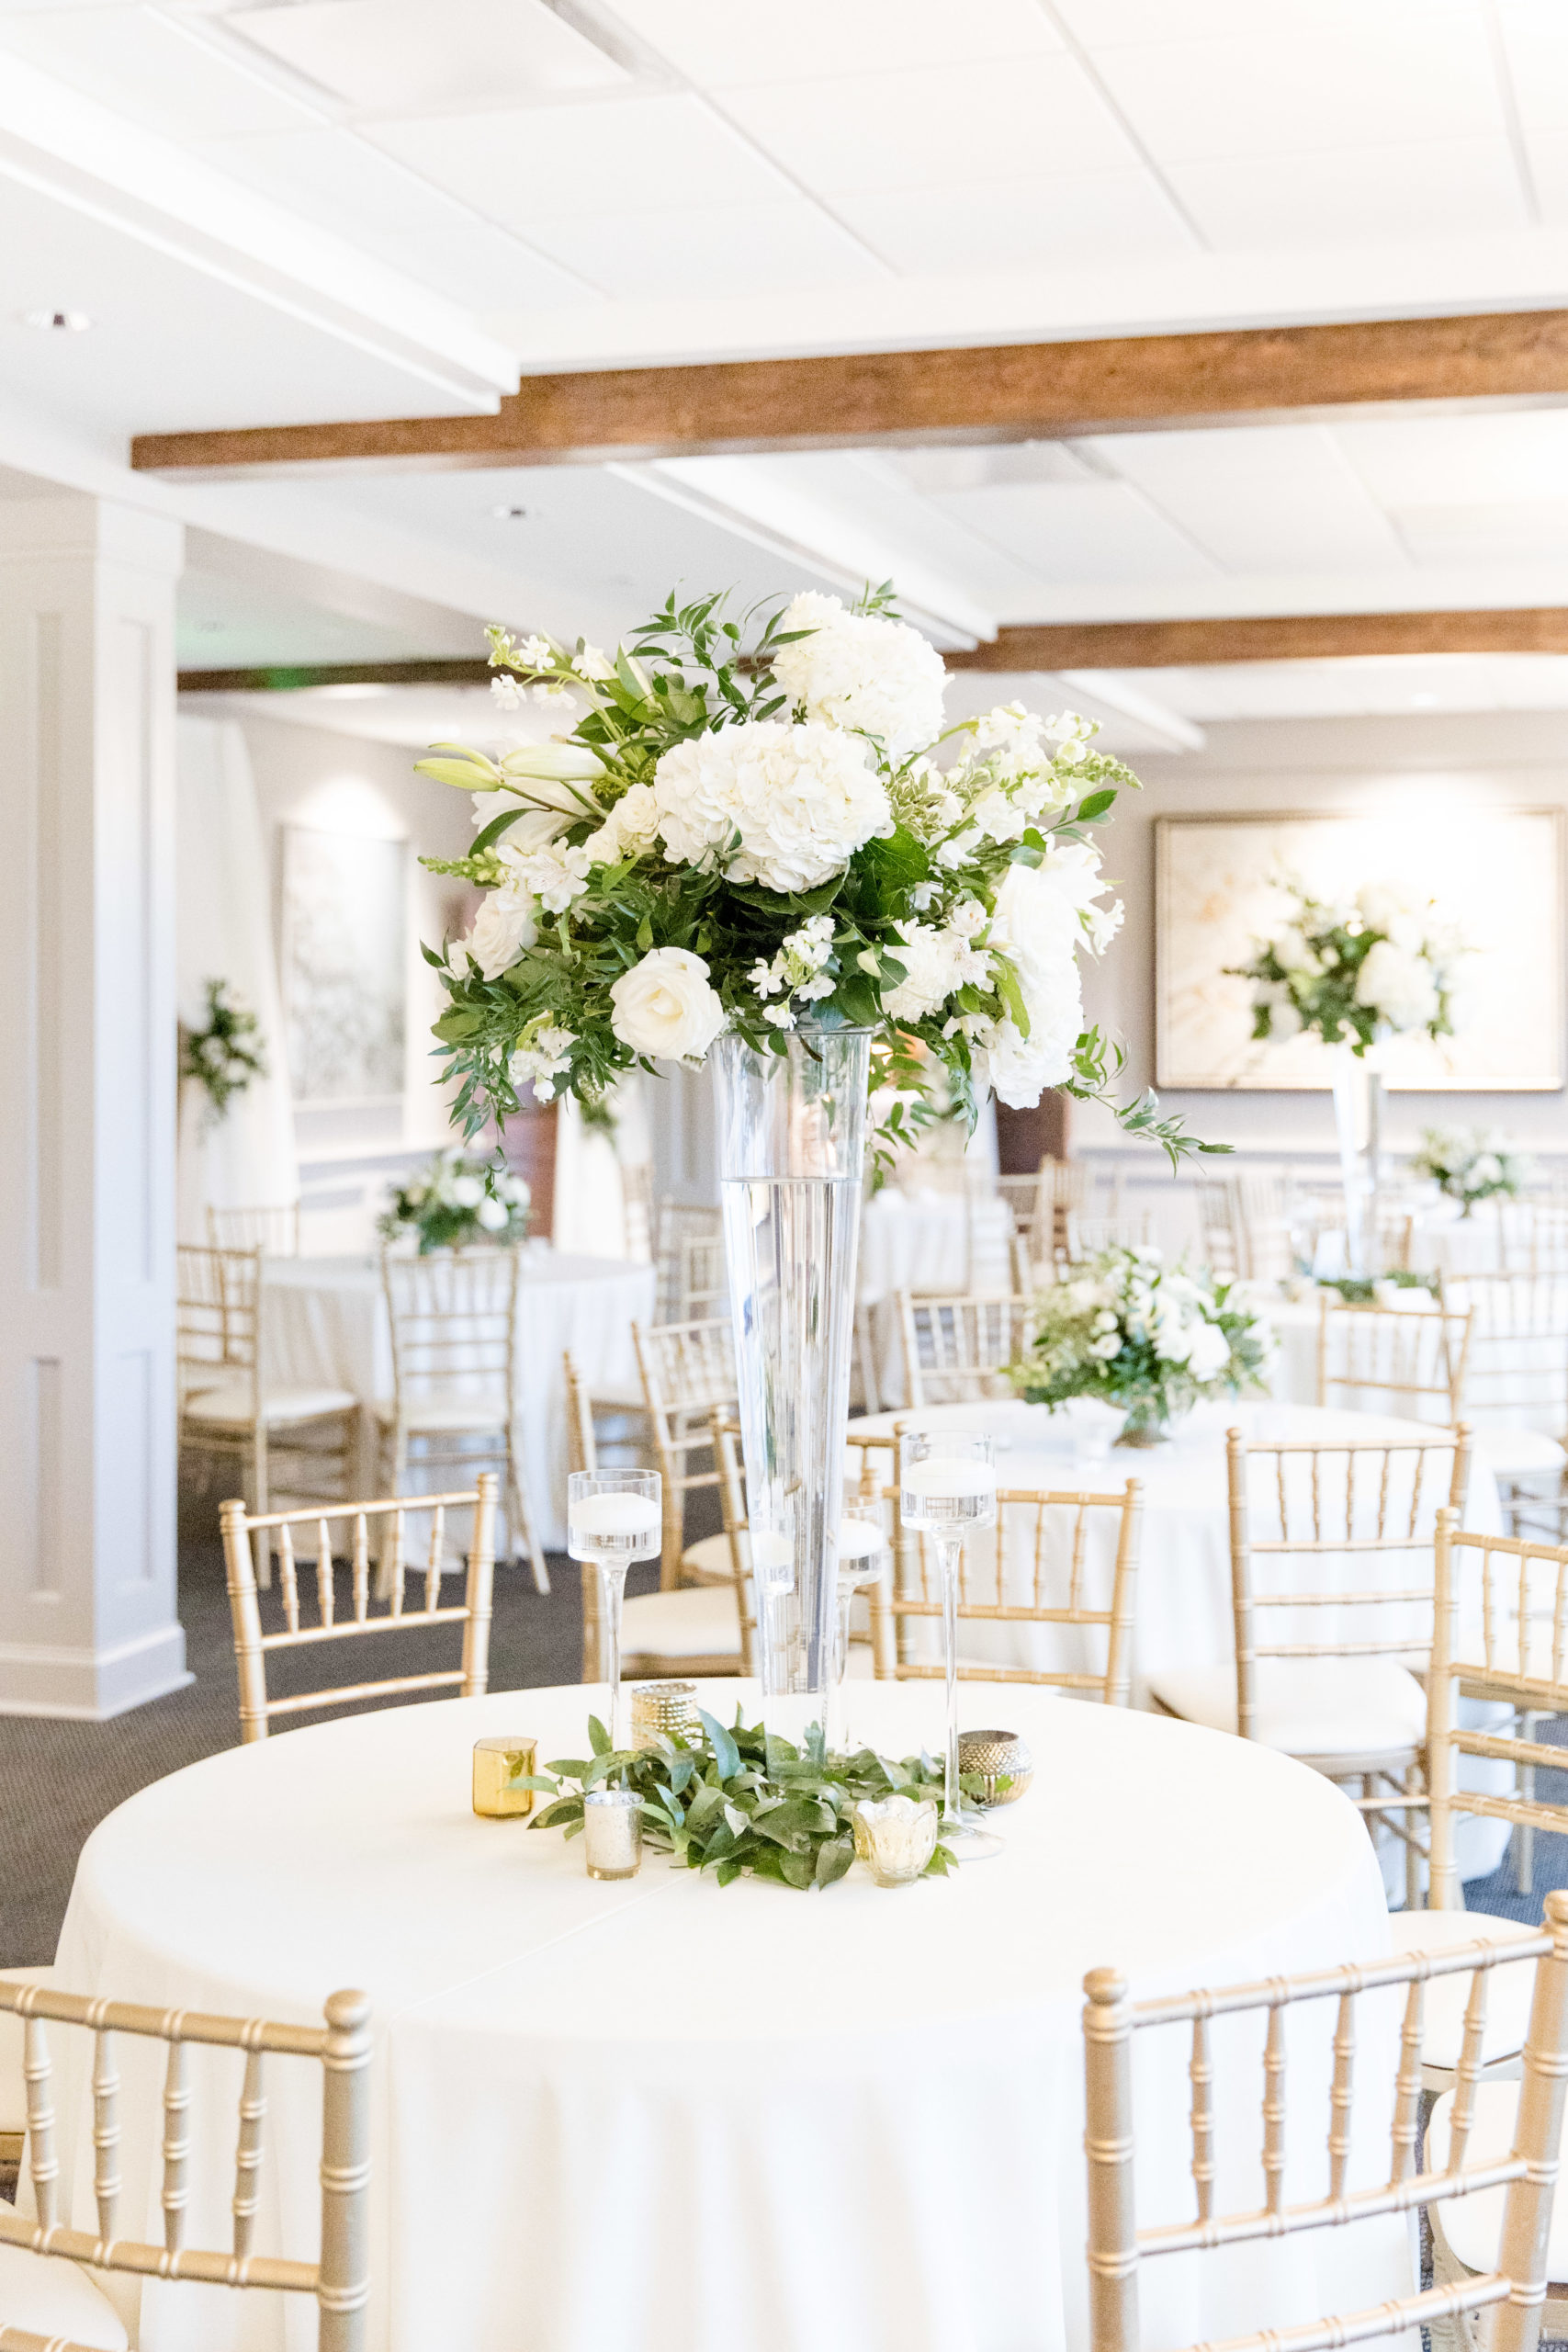 White flowers sit on wedding reception tables.